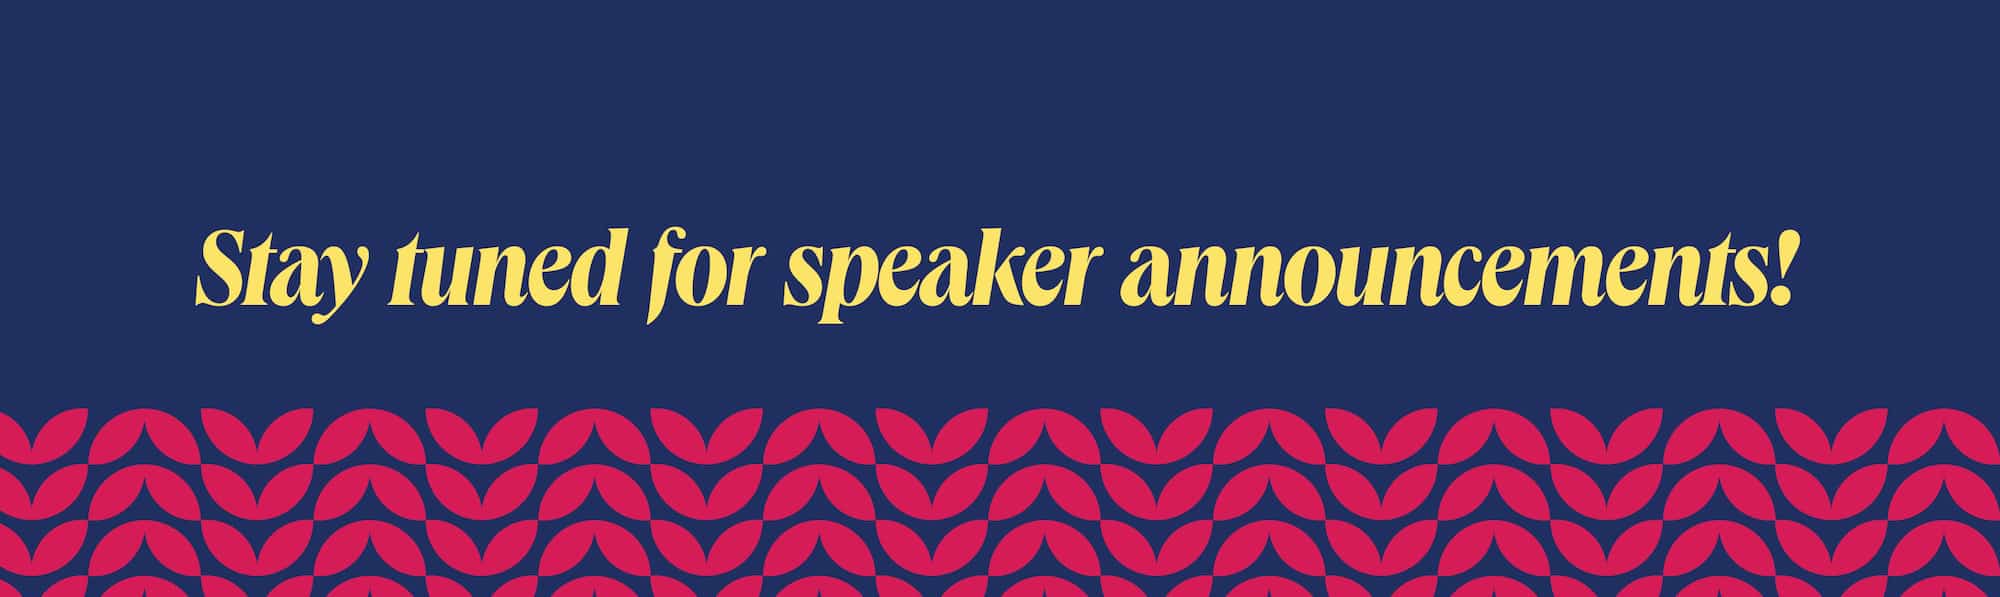 Stay tuned for speaker announcements!